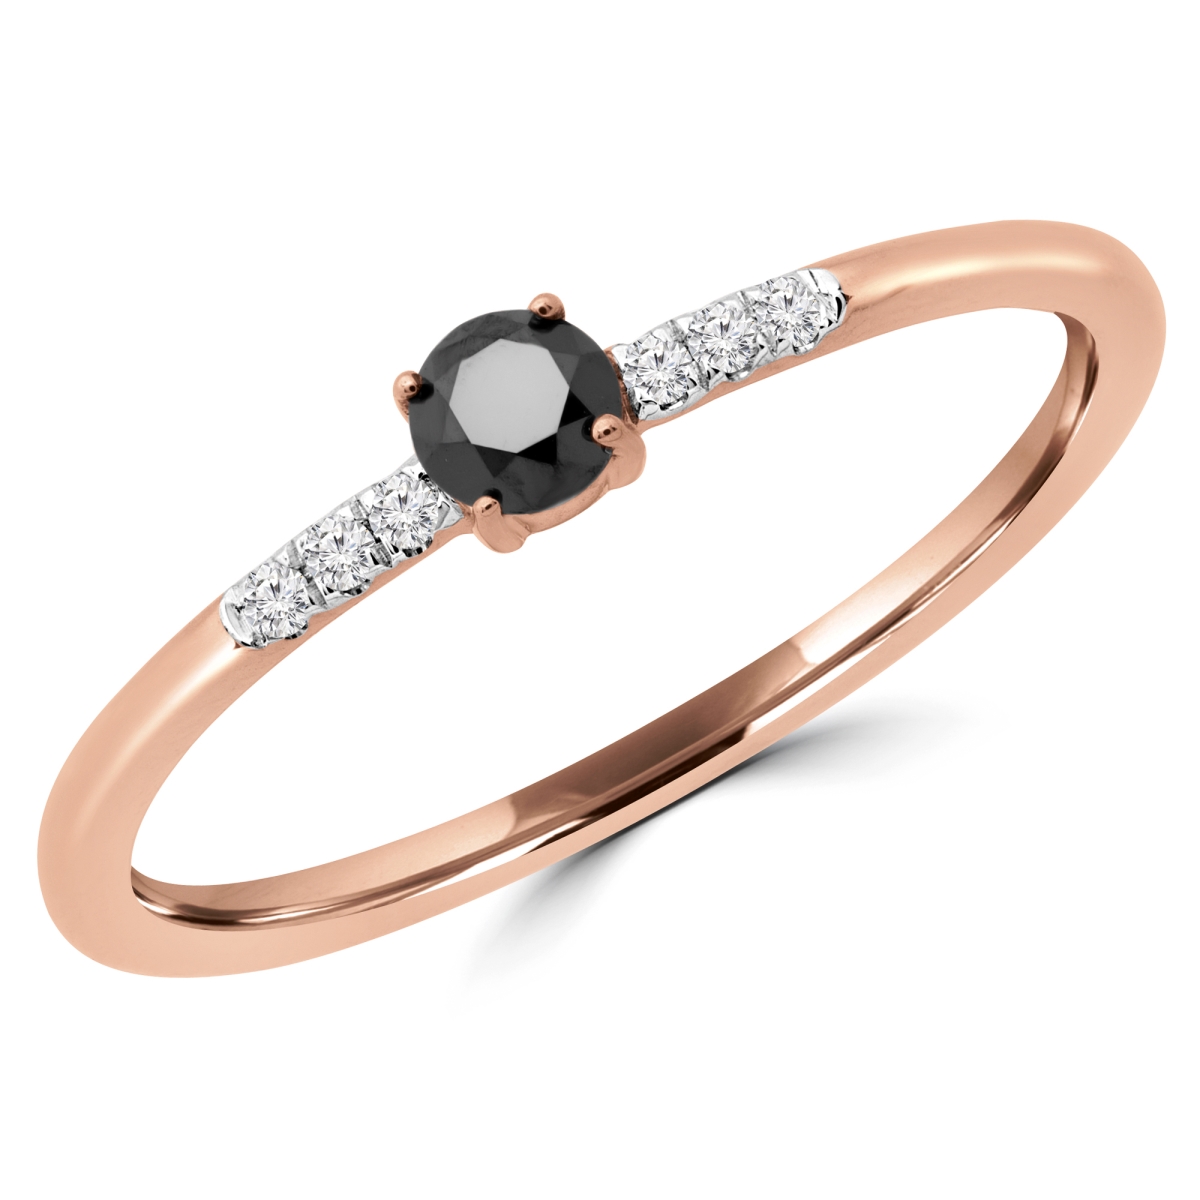 Picture of Majesty Diamonds MDR190079-5.75 0.16 CTW Round Black Diamond Bezel Set Cocktail Ring in 14K Rose Gold - Size 5.75